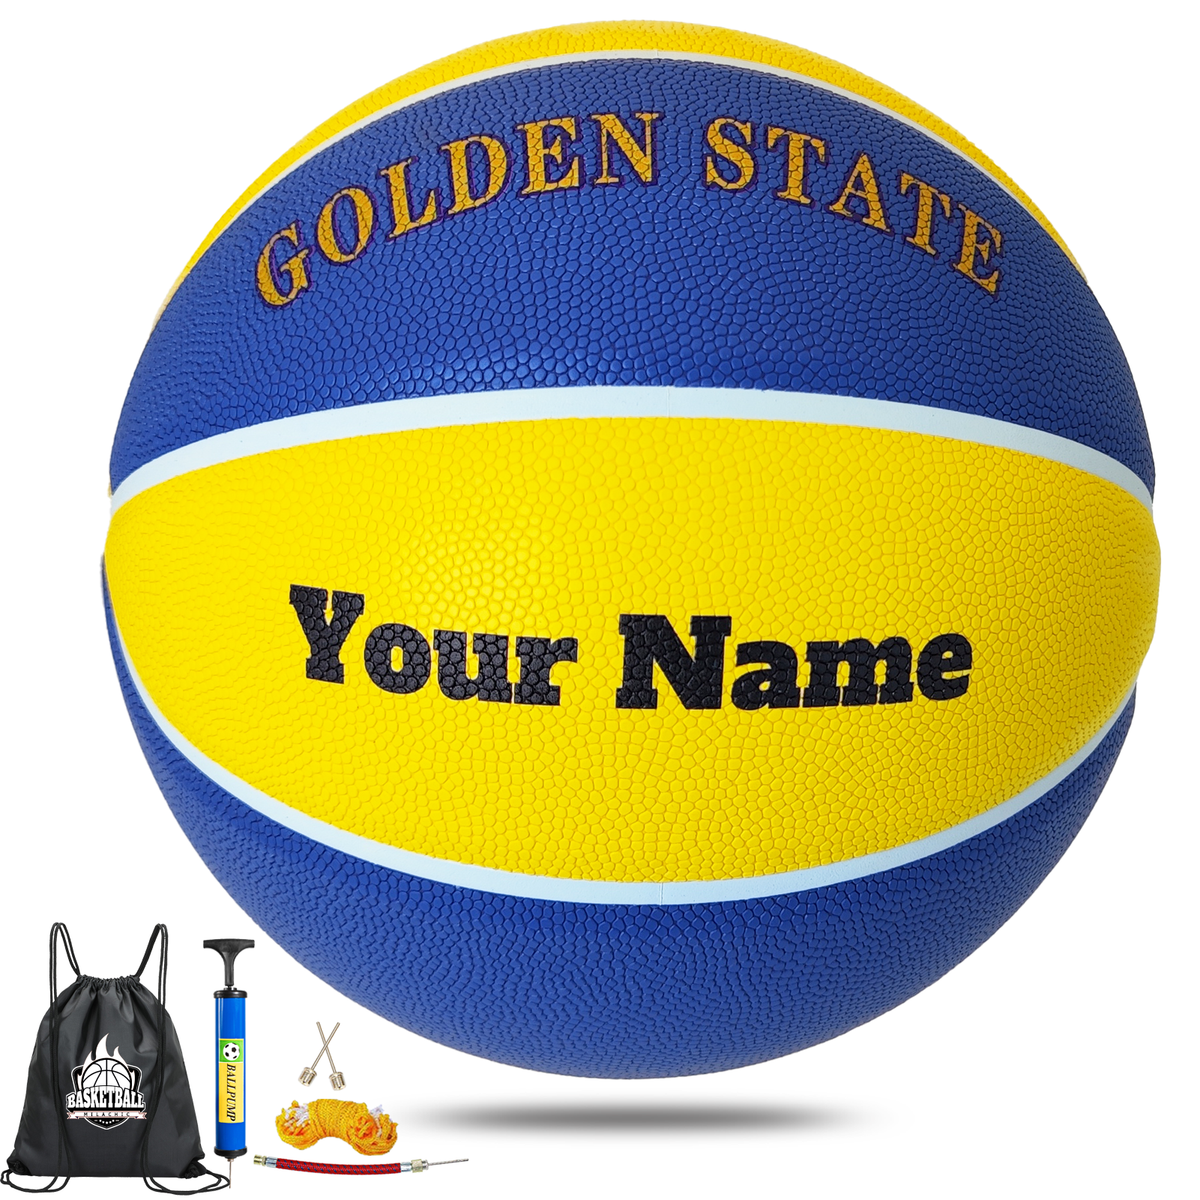 Personalized Indoor/Outdoor Basketball NBA Team Golden State  Size 5 - 27.5”, Size 6 - 28.5” and Size 7 - 29.5”